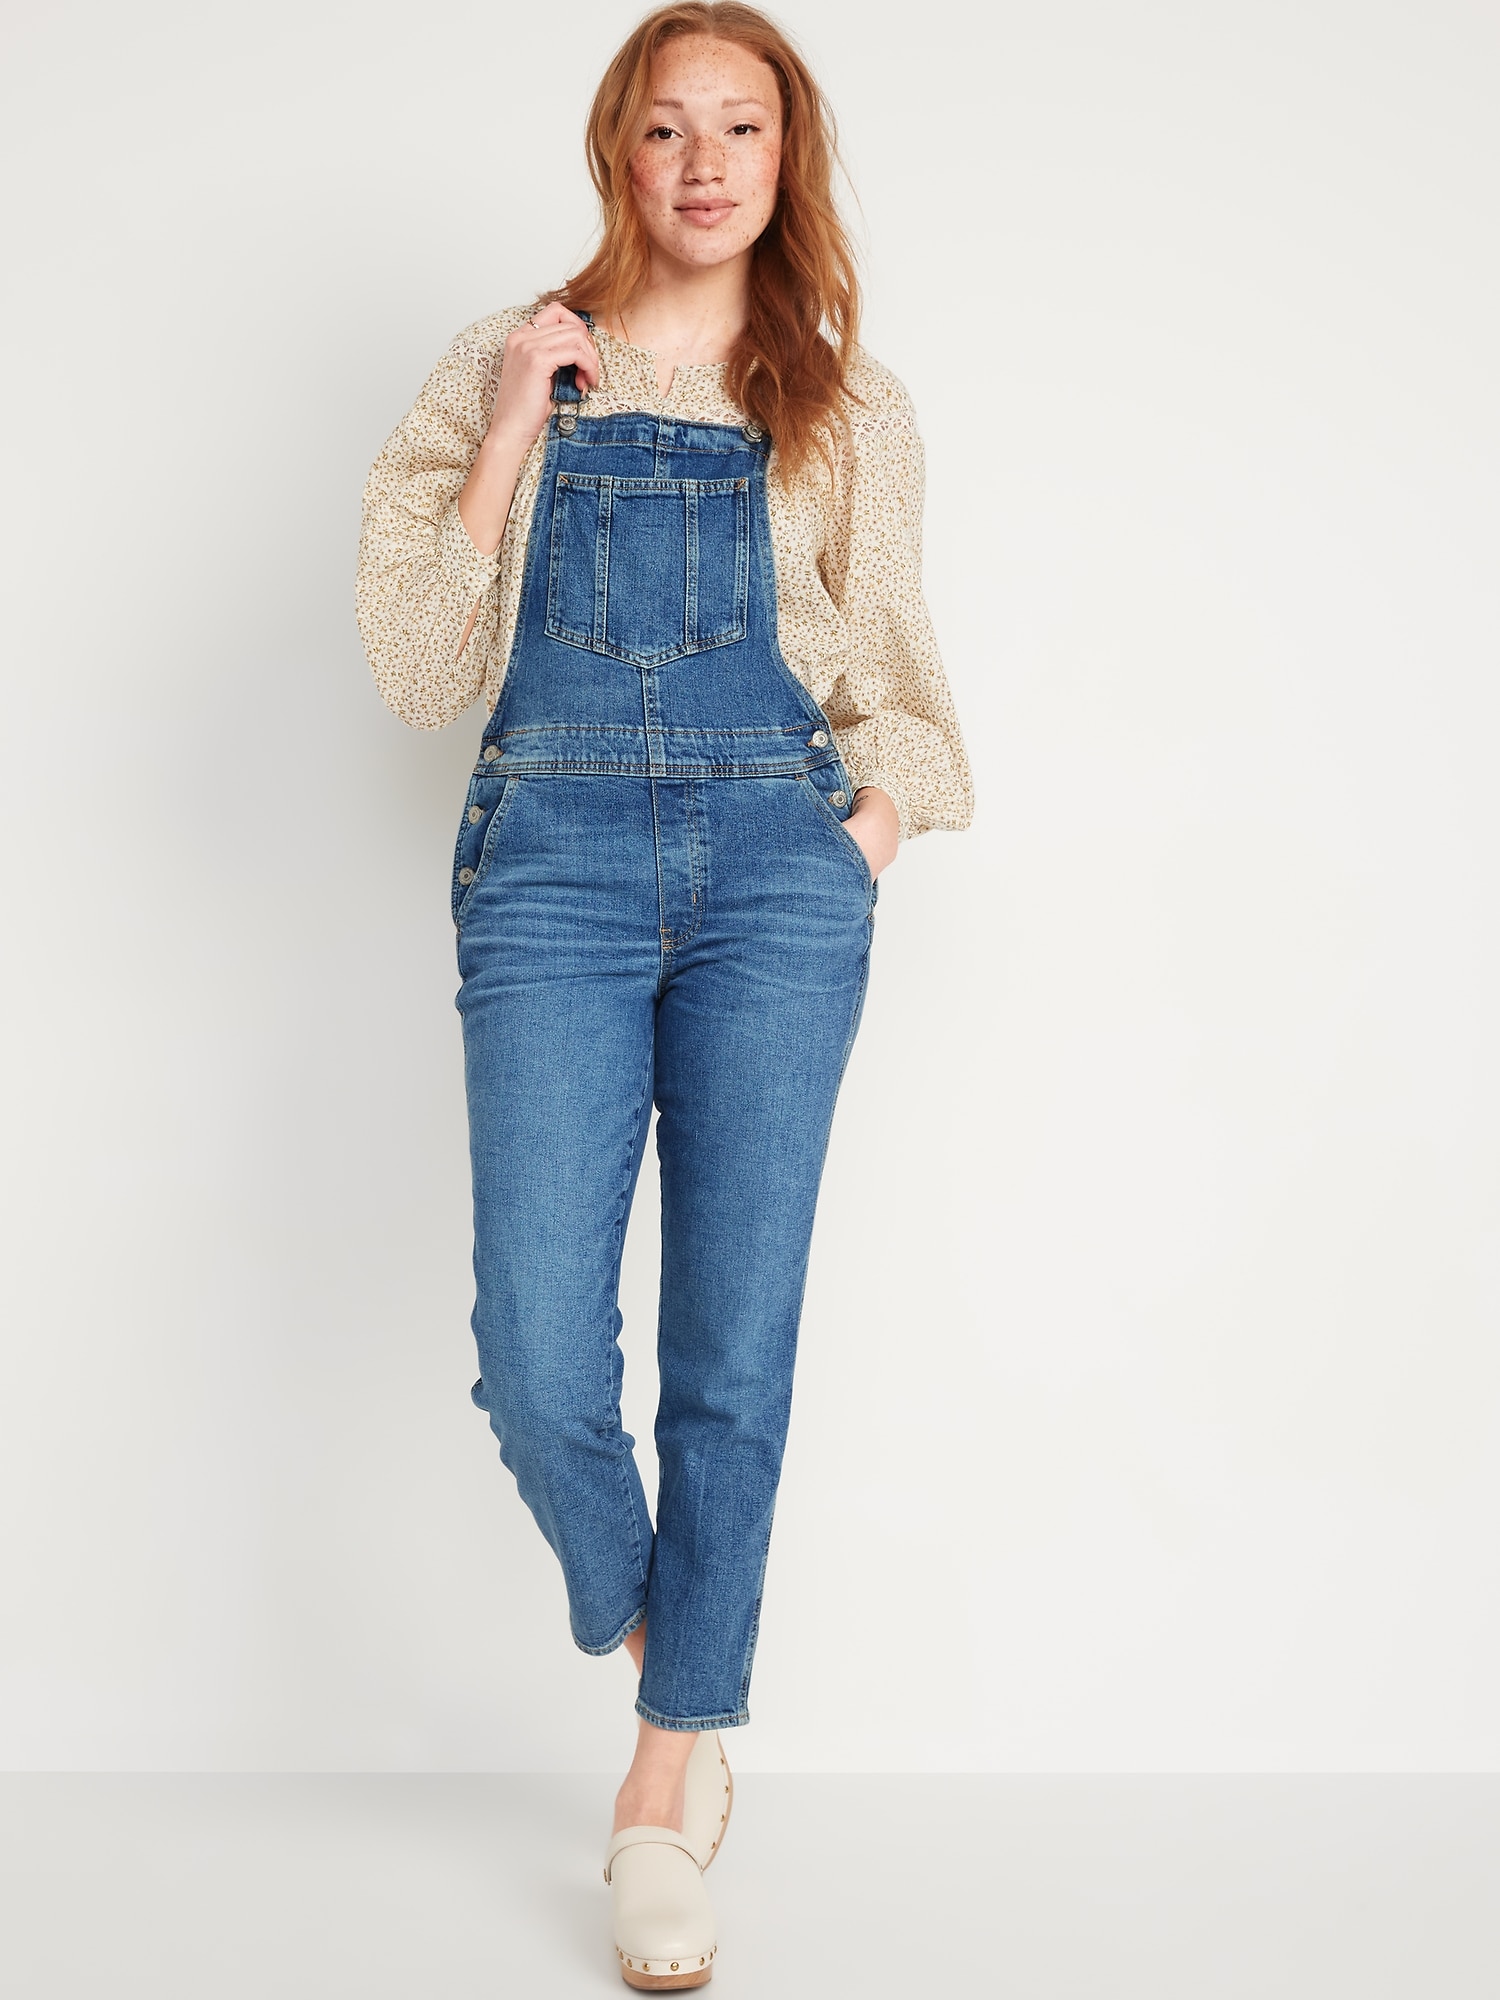 Old Navy O.G. Straight Ripped Jean Overalls for Women blue. 1